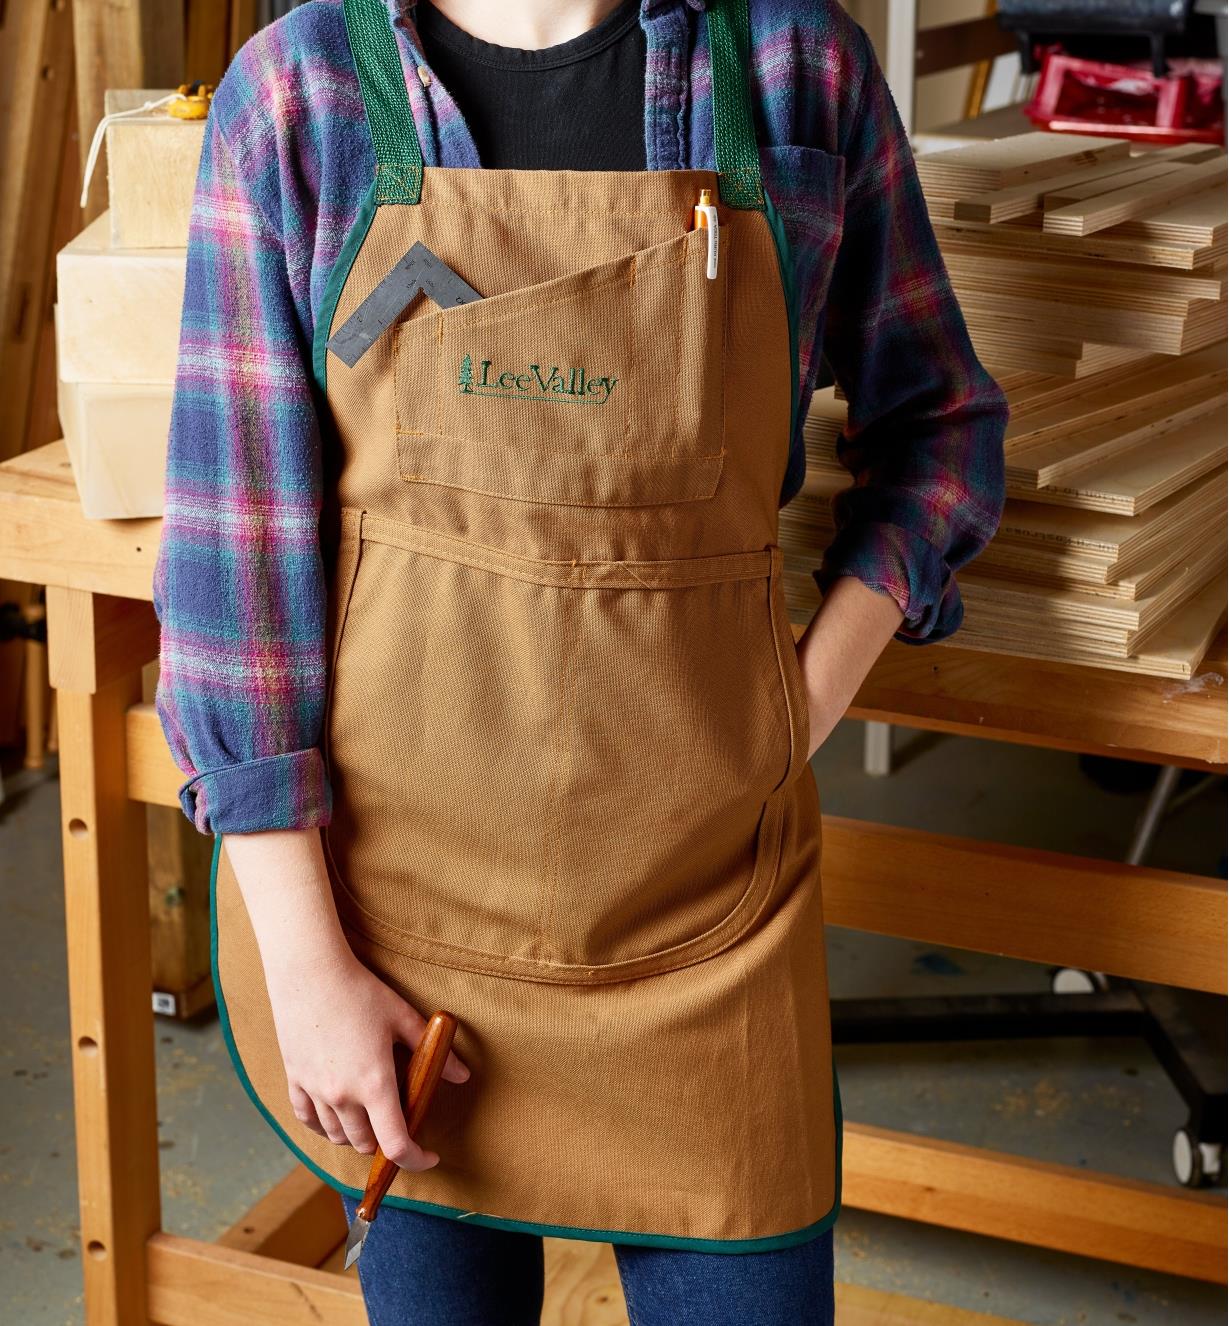 A person wearing a Lee Valley apron in a workshop